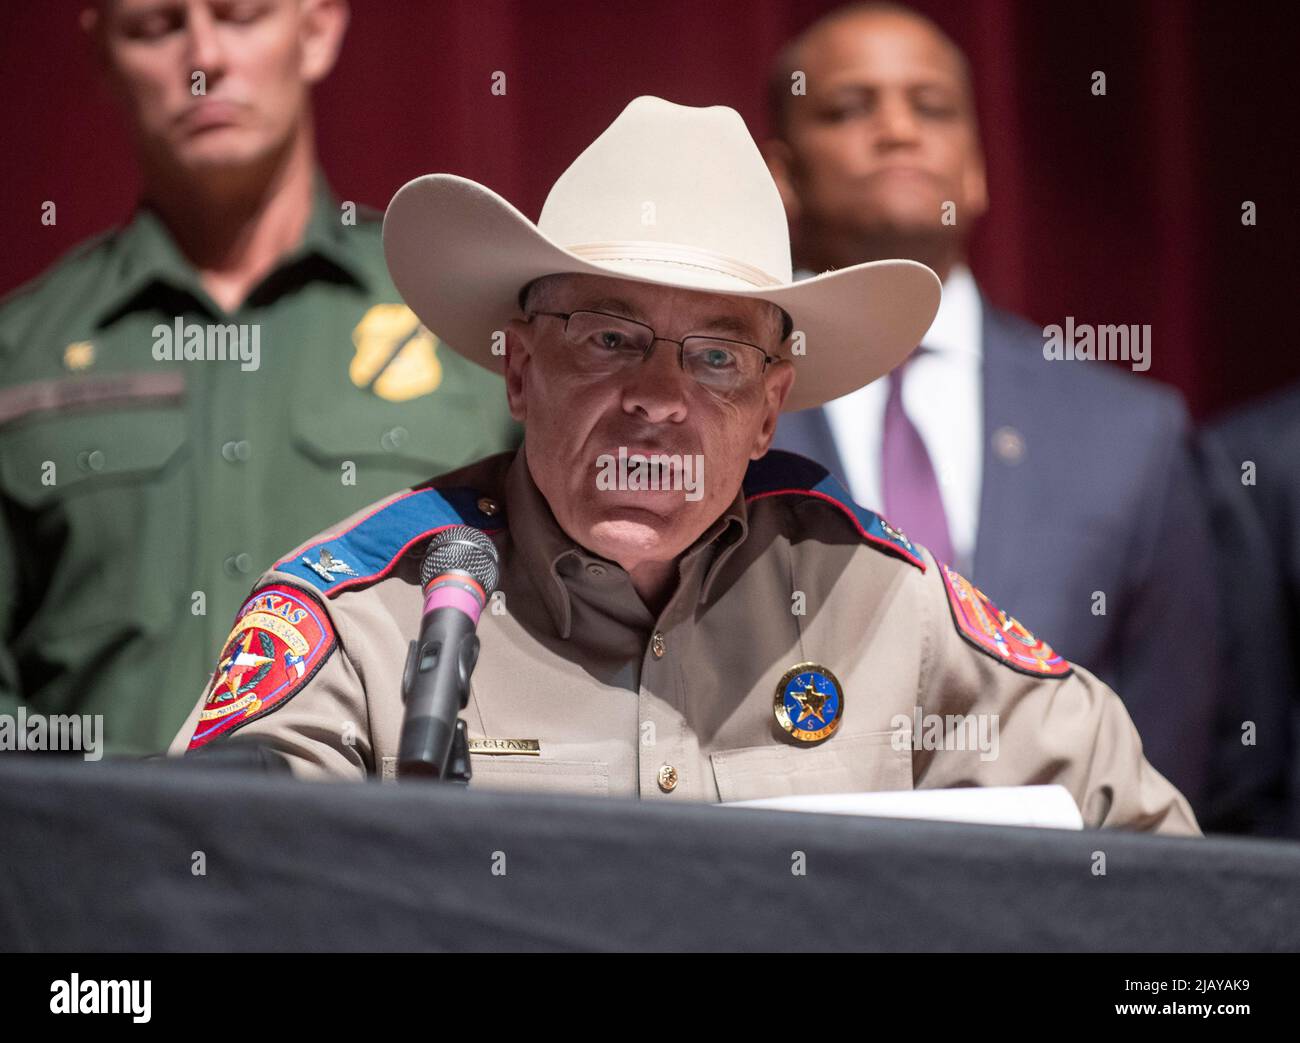 Uvalde Texas USA, May 25 2022: Texas state officials, including Texas Department of Public Safety Director STEVE MCCRAW, hold a press briefing at Uvalde High School a day after an 18-year old gunman entered Robb Elementary School and killed 19 students and two teachers. ©Bob Daemmrich Stock Photo